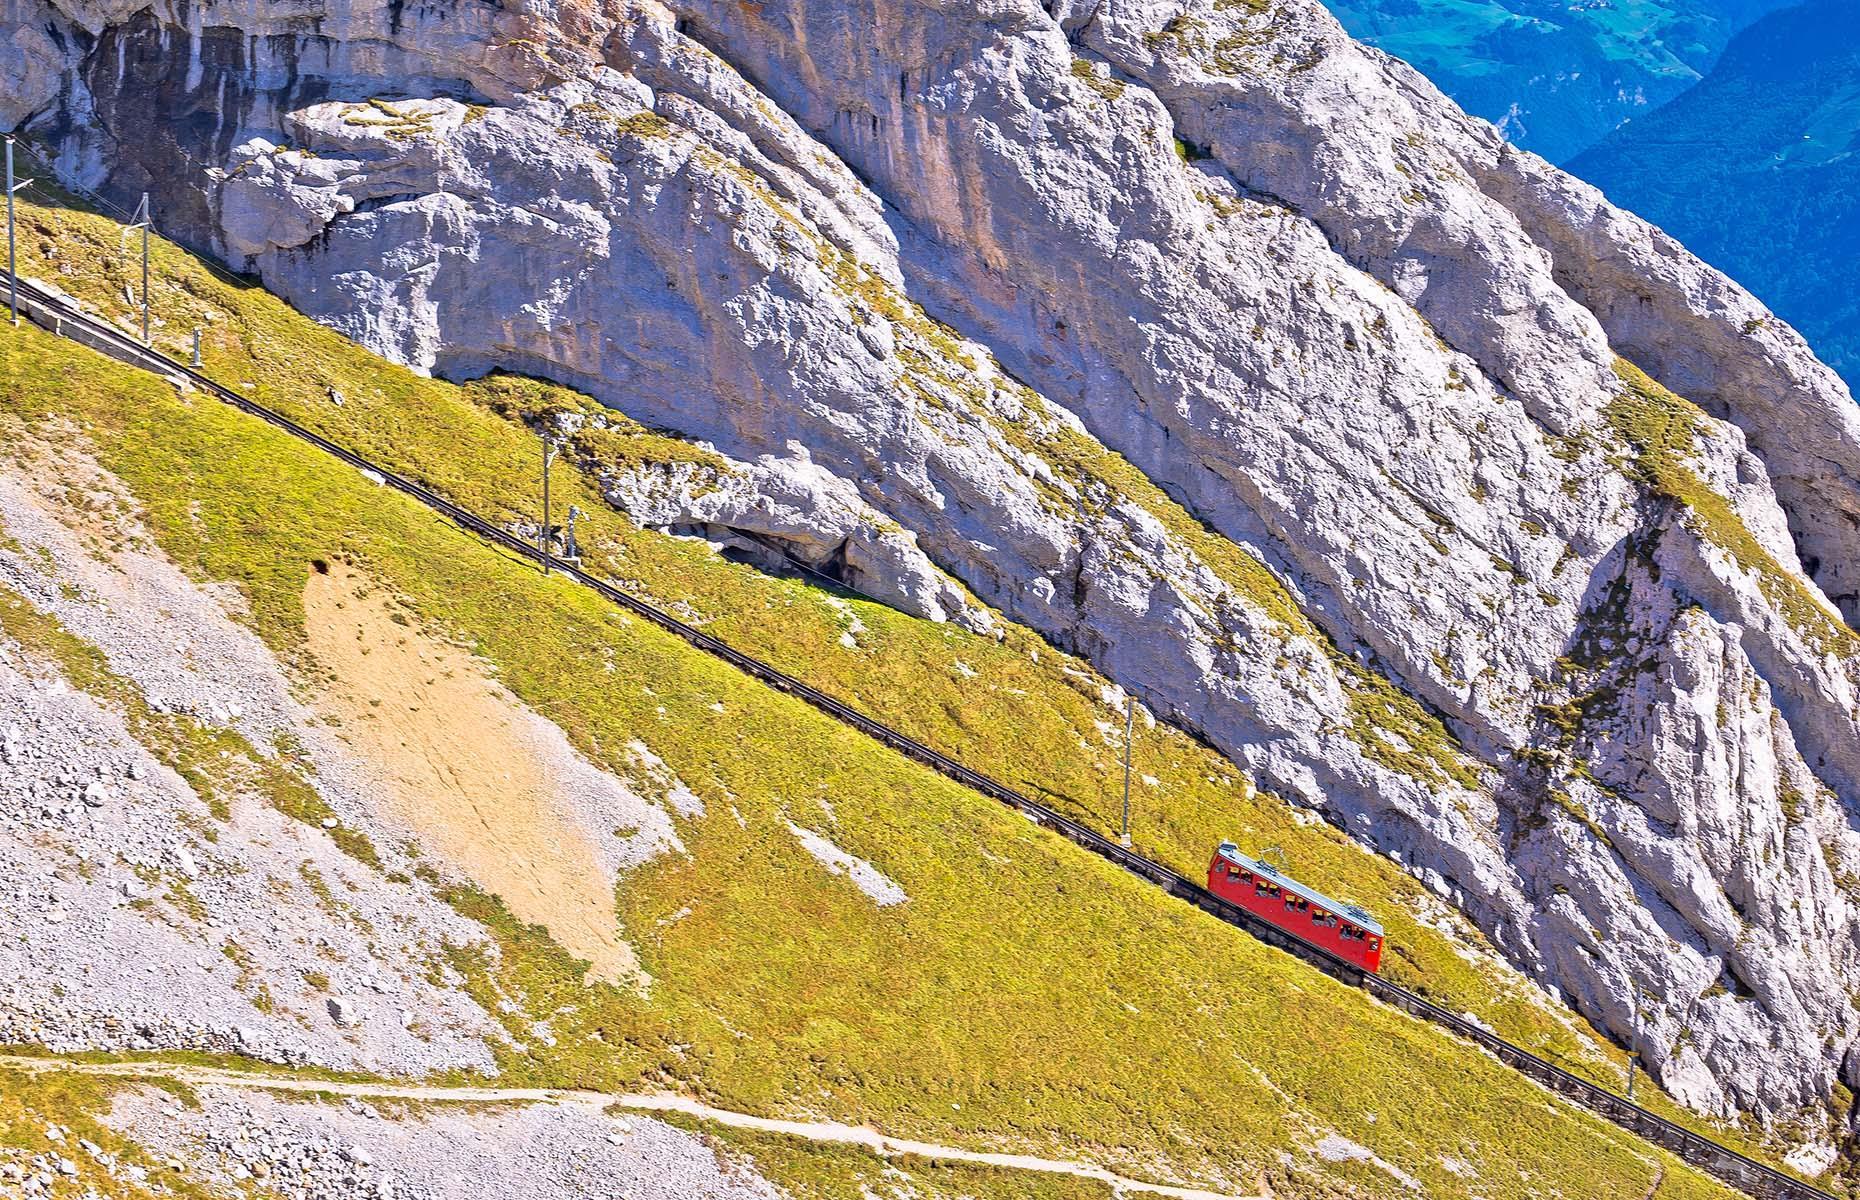 <p><a href="https://www.bbc.co.uk/news/world-europe-42384814">The steepest cogwheel railway in the world</a>, this train, ferrying passengers up to the summit of Mount Pilatus, is no mean feat. Reaching a maximum gradient of up to 48% it can be a challenging journey as it feels like the train is about to topple over at any second. The track's steep gradient is not its only spine-chilling feature. Clinging on to the mountainside, the train passes through tunnels carved into the mountain which open up to sweeping views of the surrounding landscape.</p>